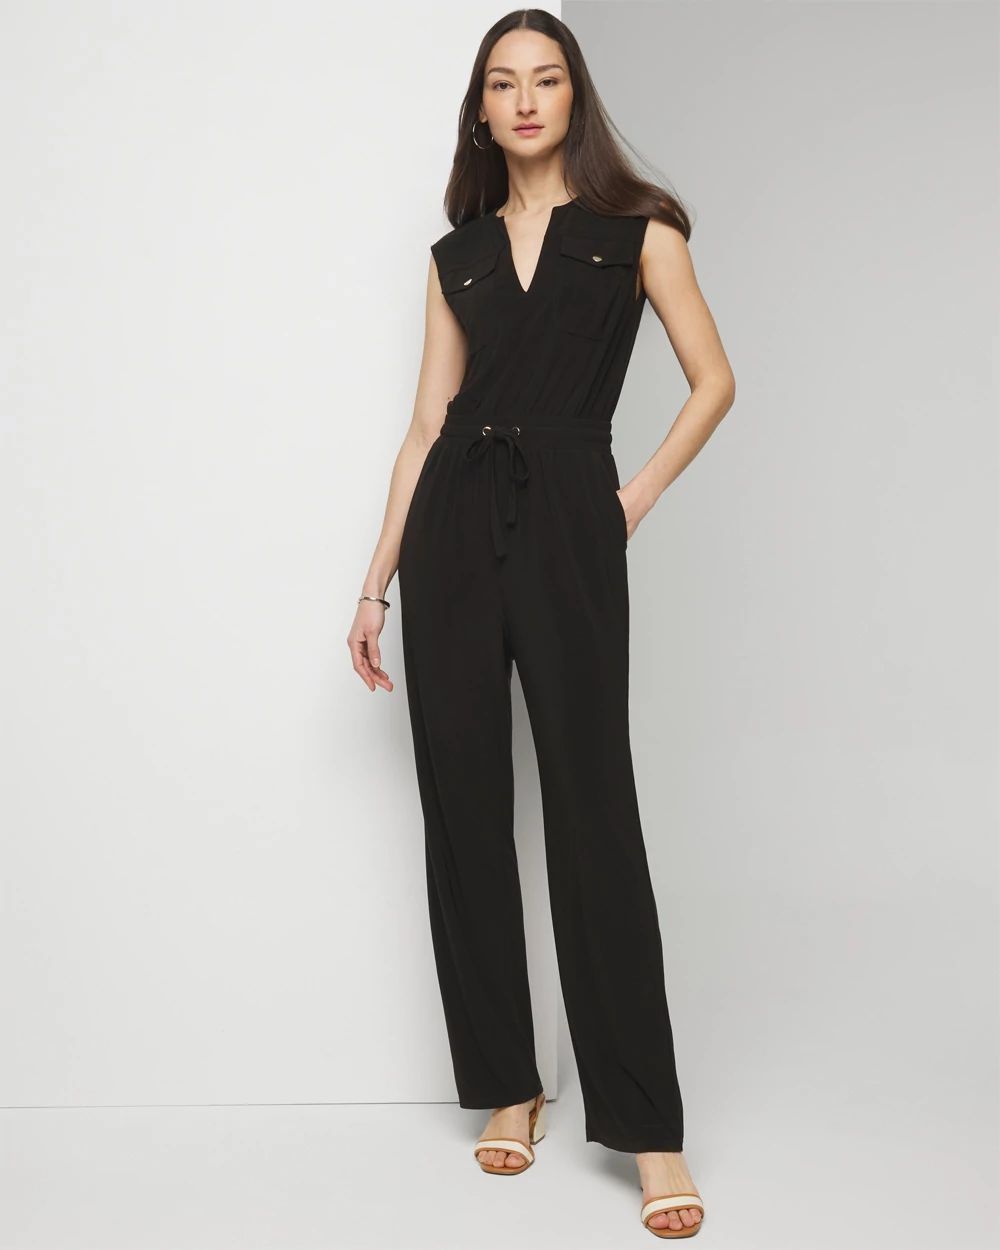 Matte Jersey Utility Jumpsuit click to view larger image.